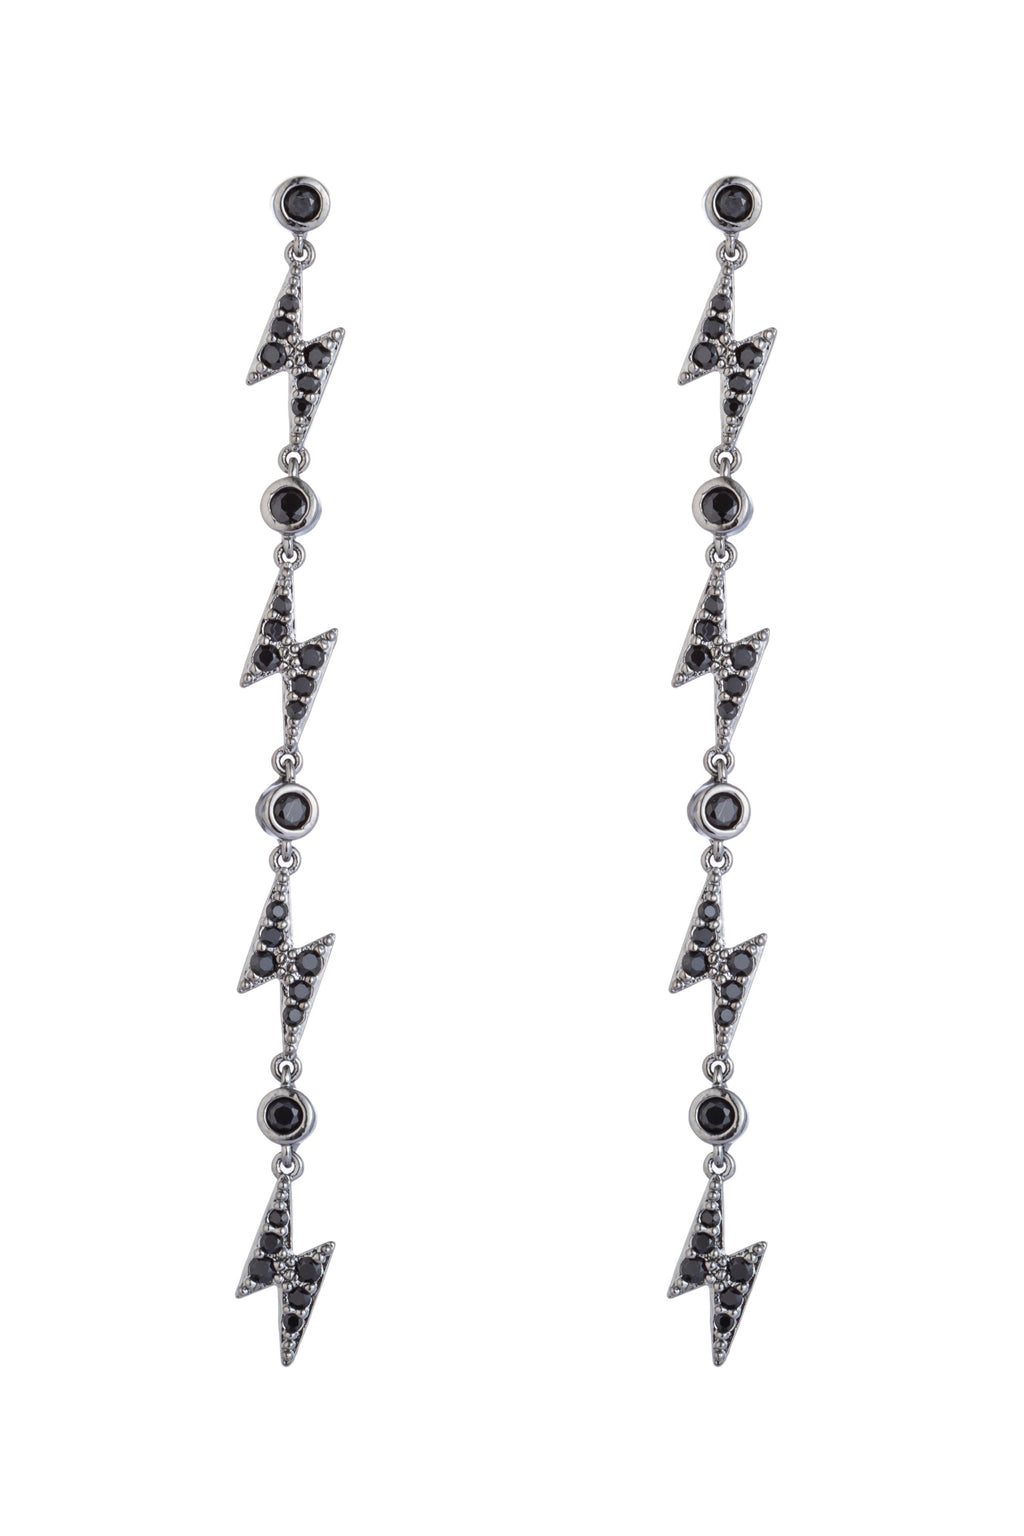 Lightning bolt dangle earrings studded with CZ crystals.